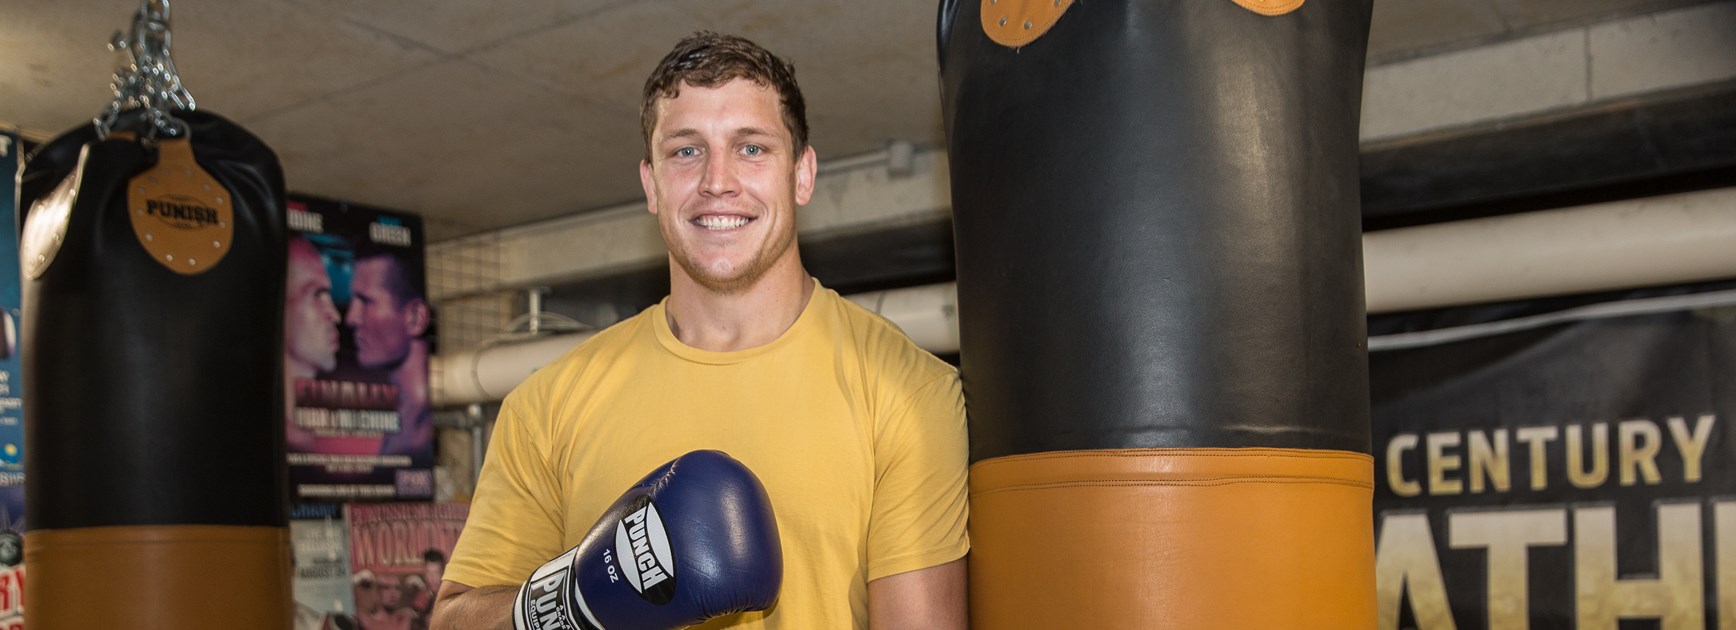 Training for boxing debut has Wallace primed for 2020 campaign